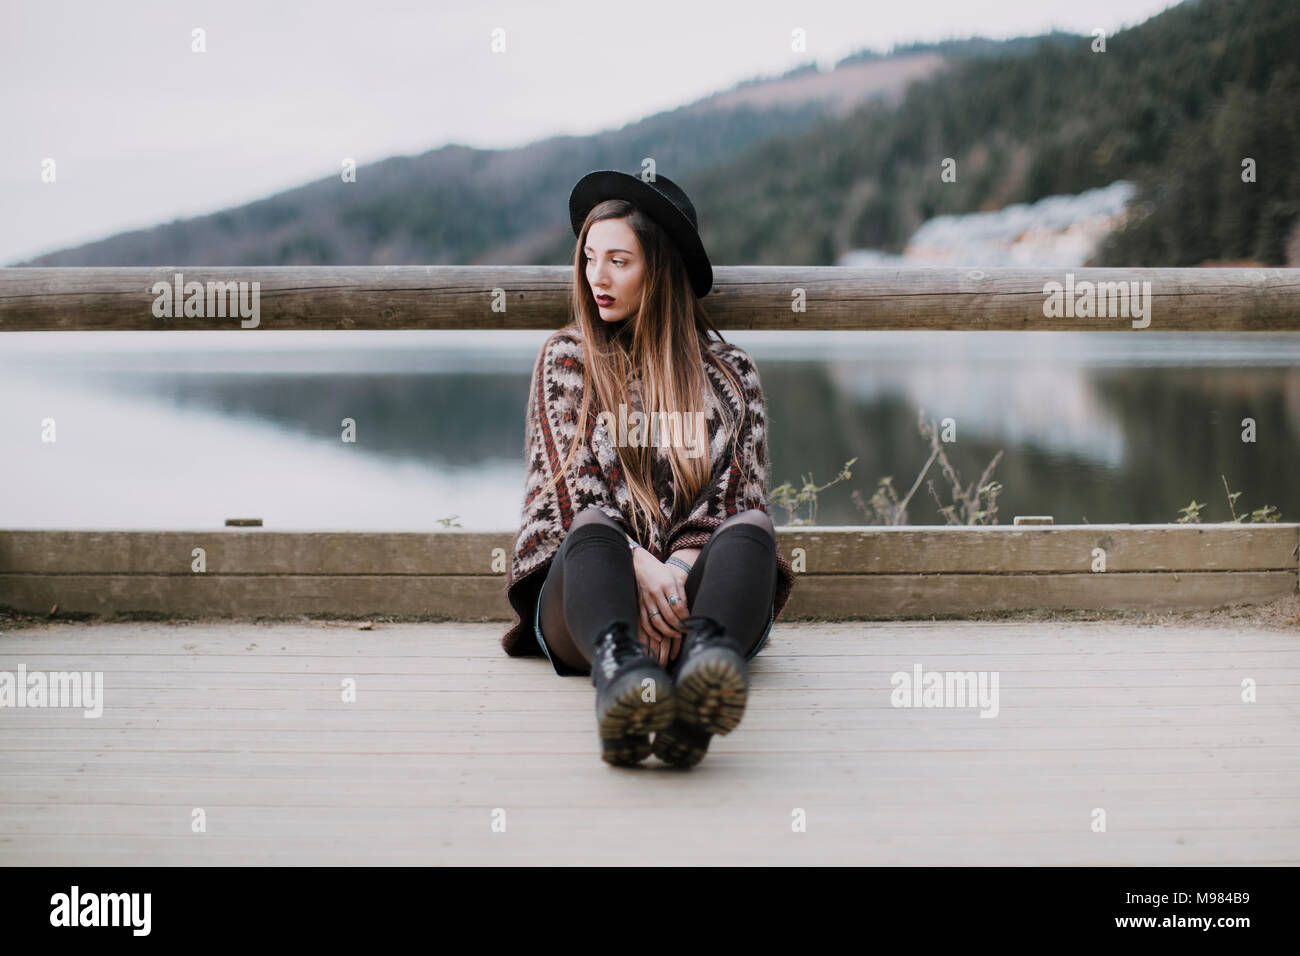 Portrait of fashionable young woman wearing hat and poncho sitting on wood bridge Stock Photo